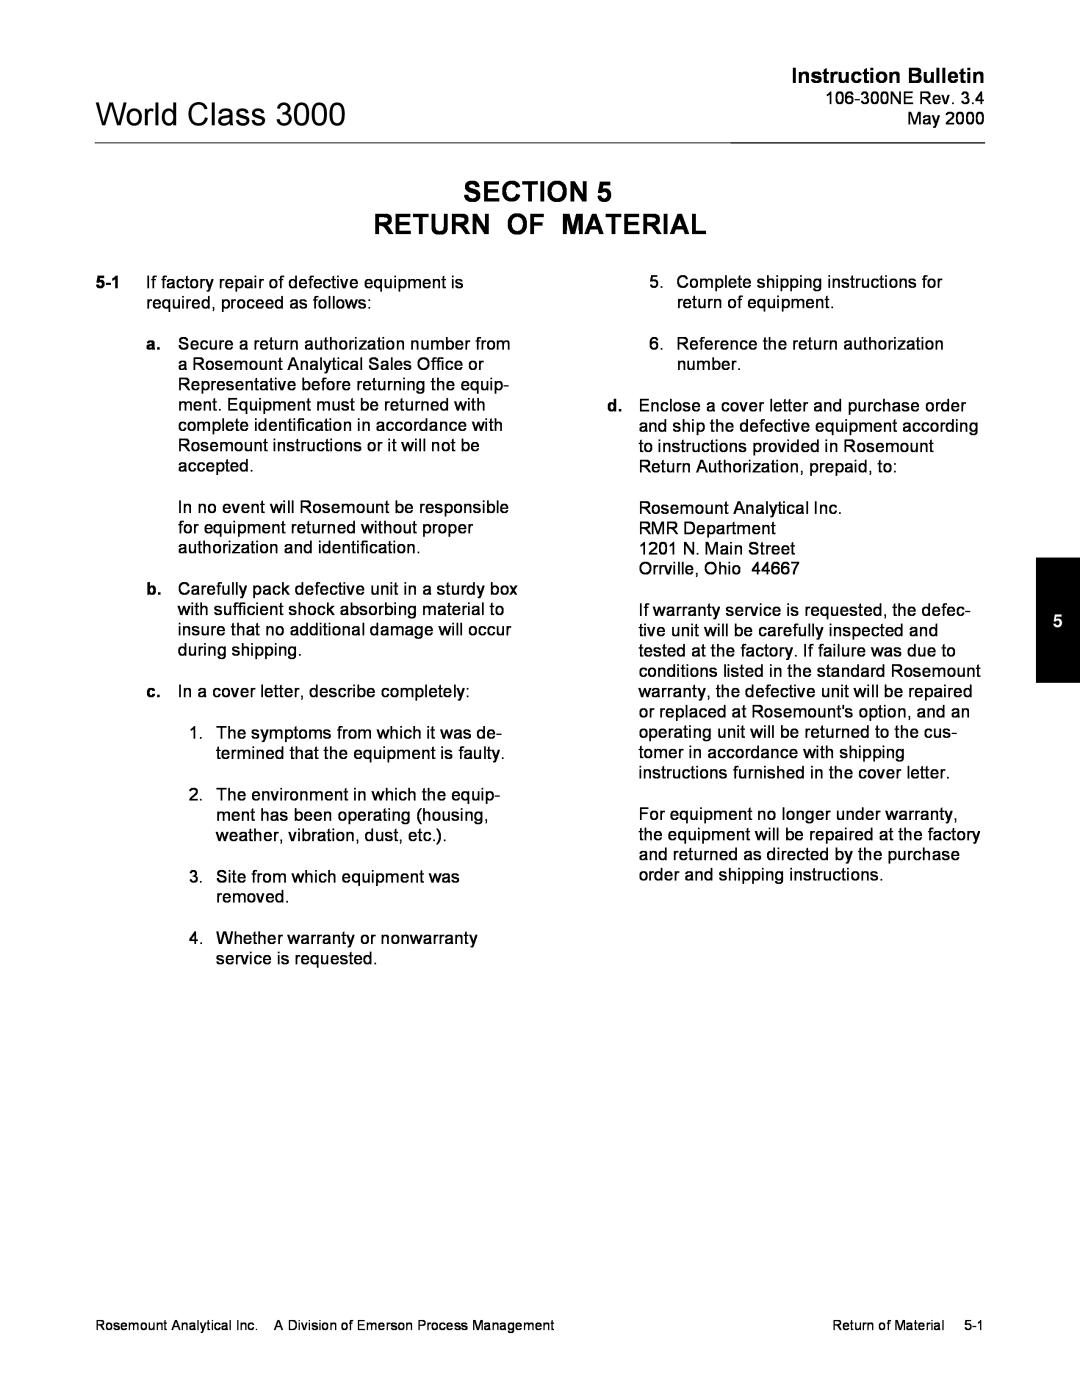 Emerson 3000 manual Section Return Of Material, Instruction Bulletin 